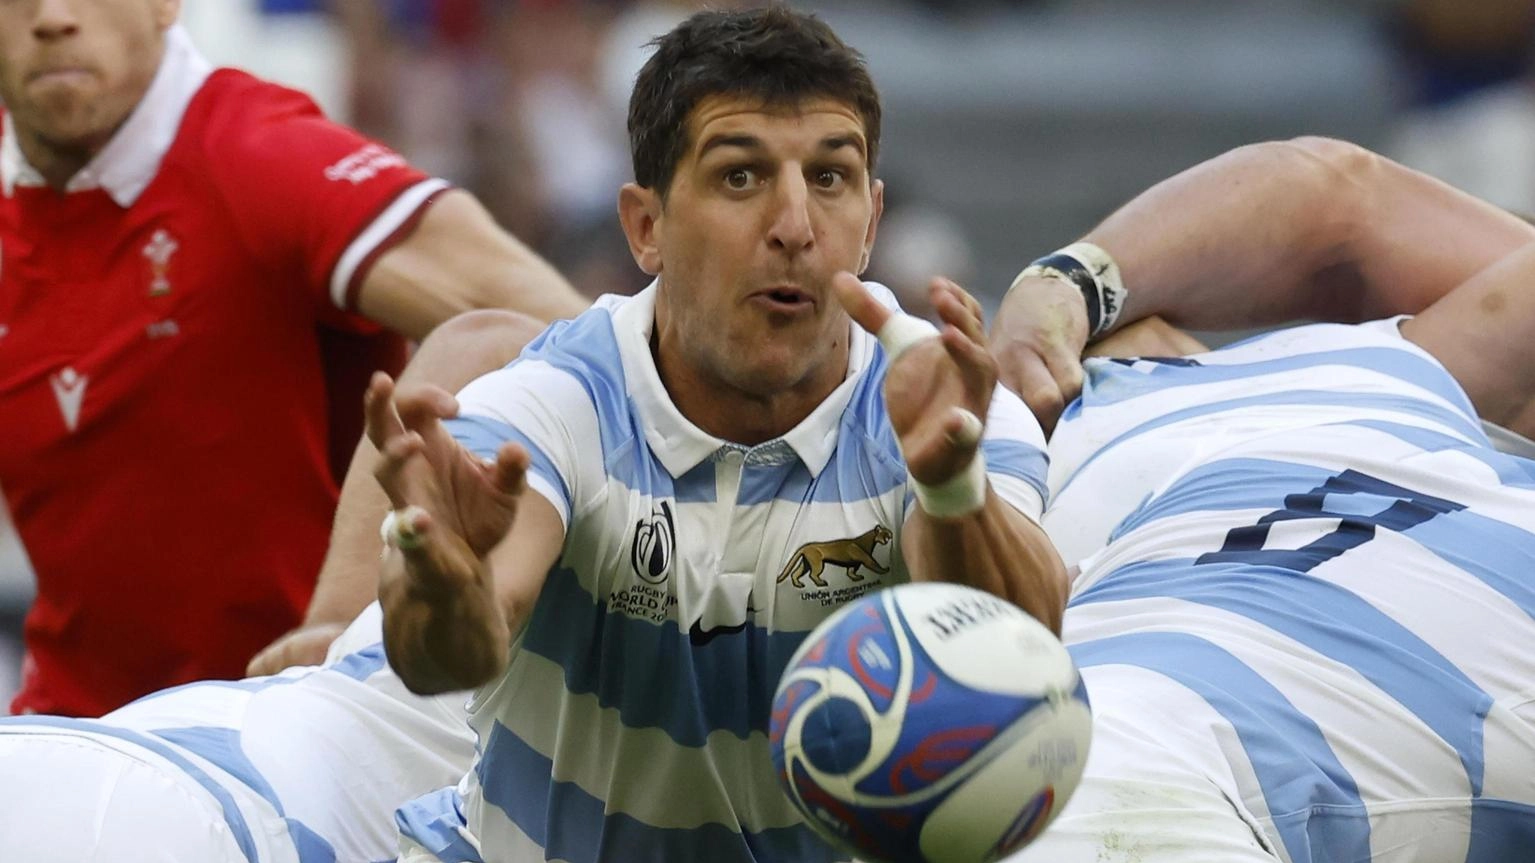 Mondiali Rugby: 29-17 al Galles, l'Argentina in semifinale